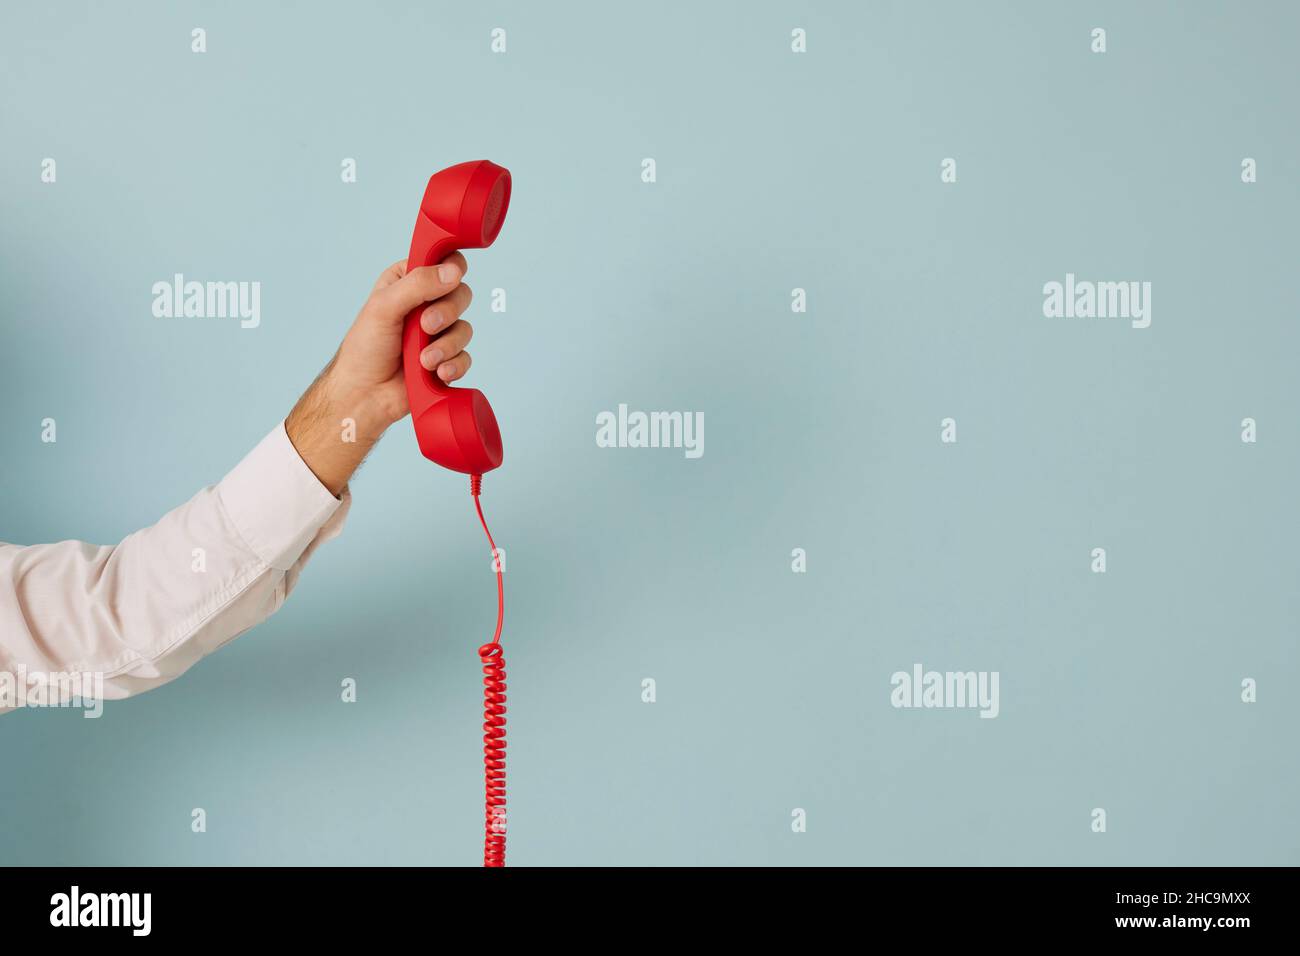 Unidentified man holding red wired retro telephone handset on light blue banner background. Stock Photo